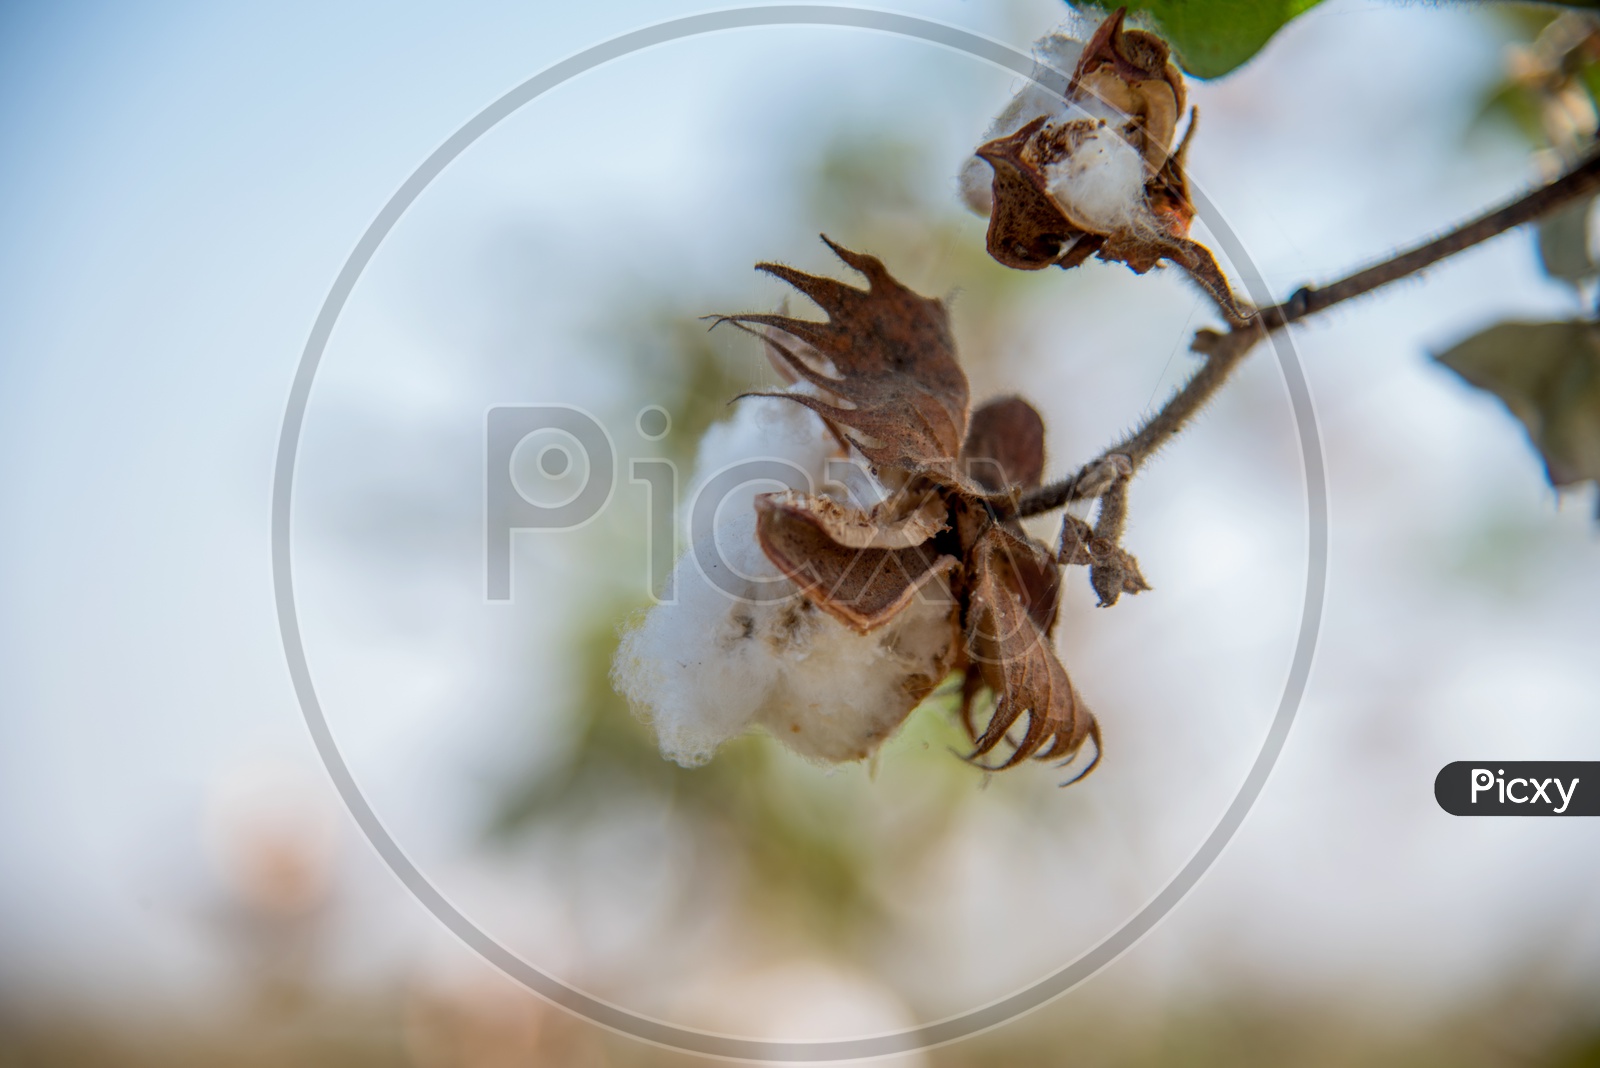 Cotton Balls And Flowers  Growing On The Plants In an Agricultural Field  or Cotton Farm